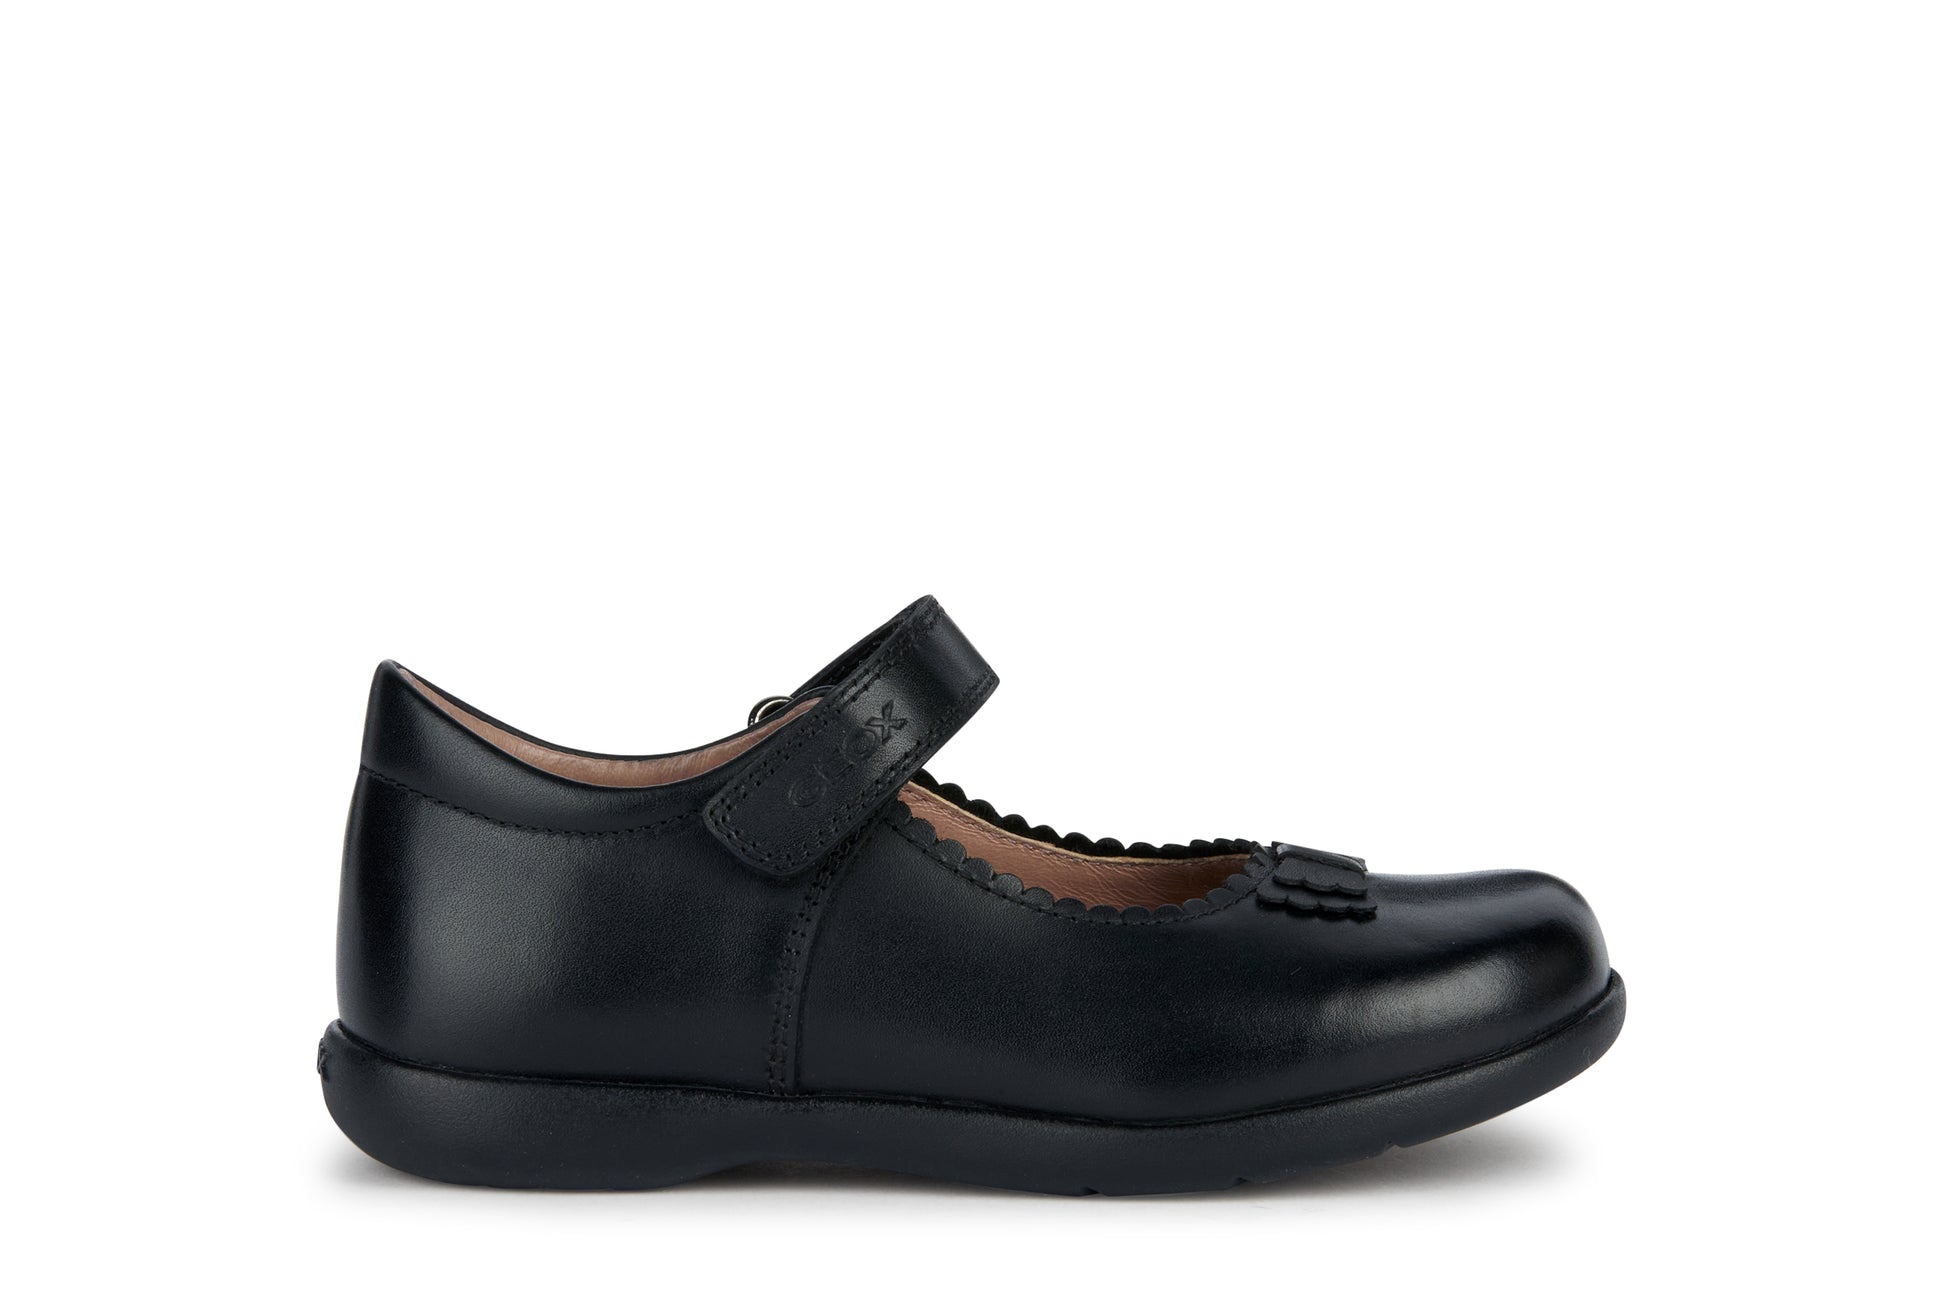 A girls school shoe by Geox, style Naimara in black with velcro strap. Right side view.